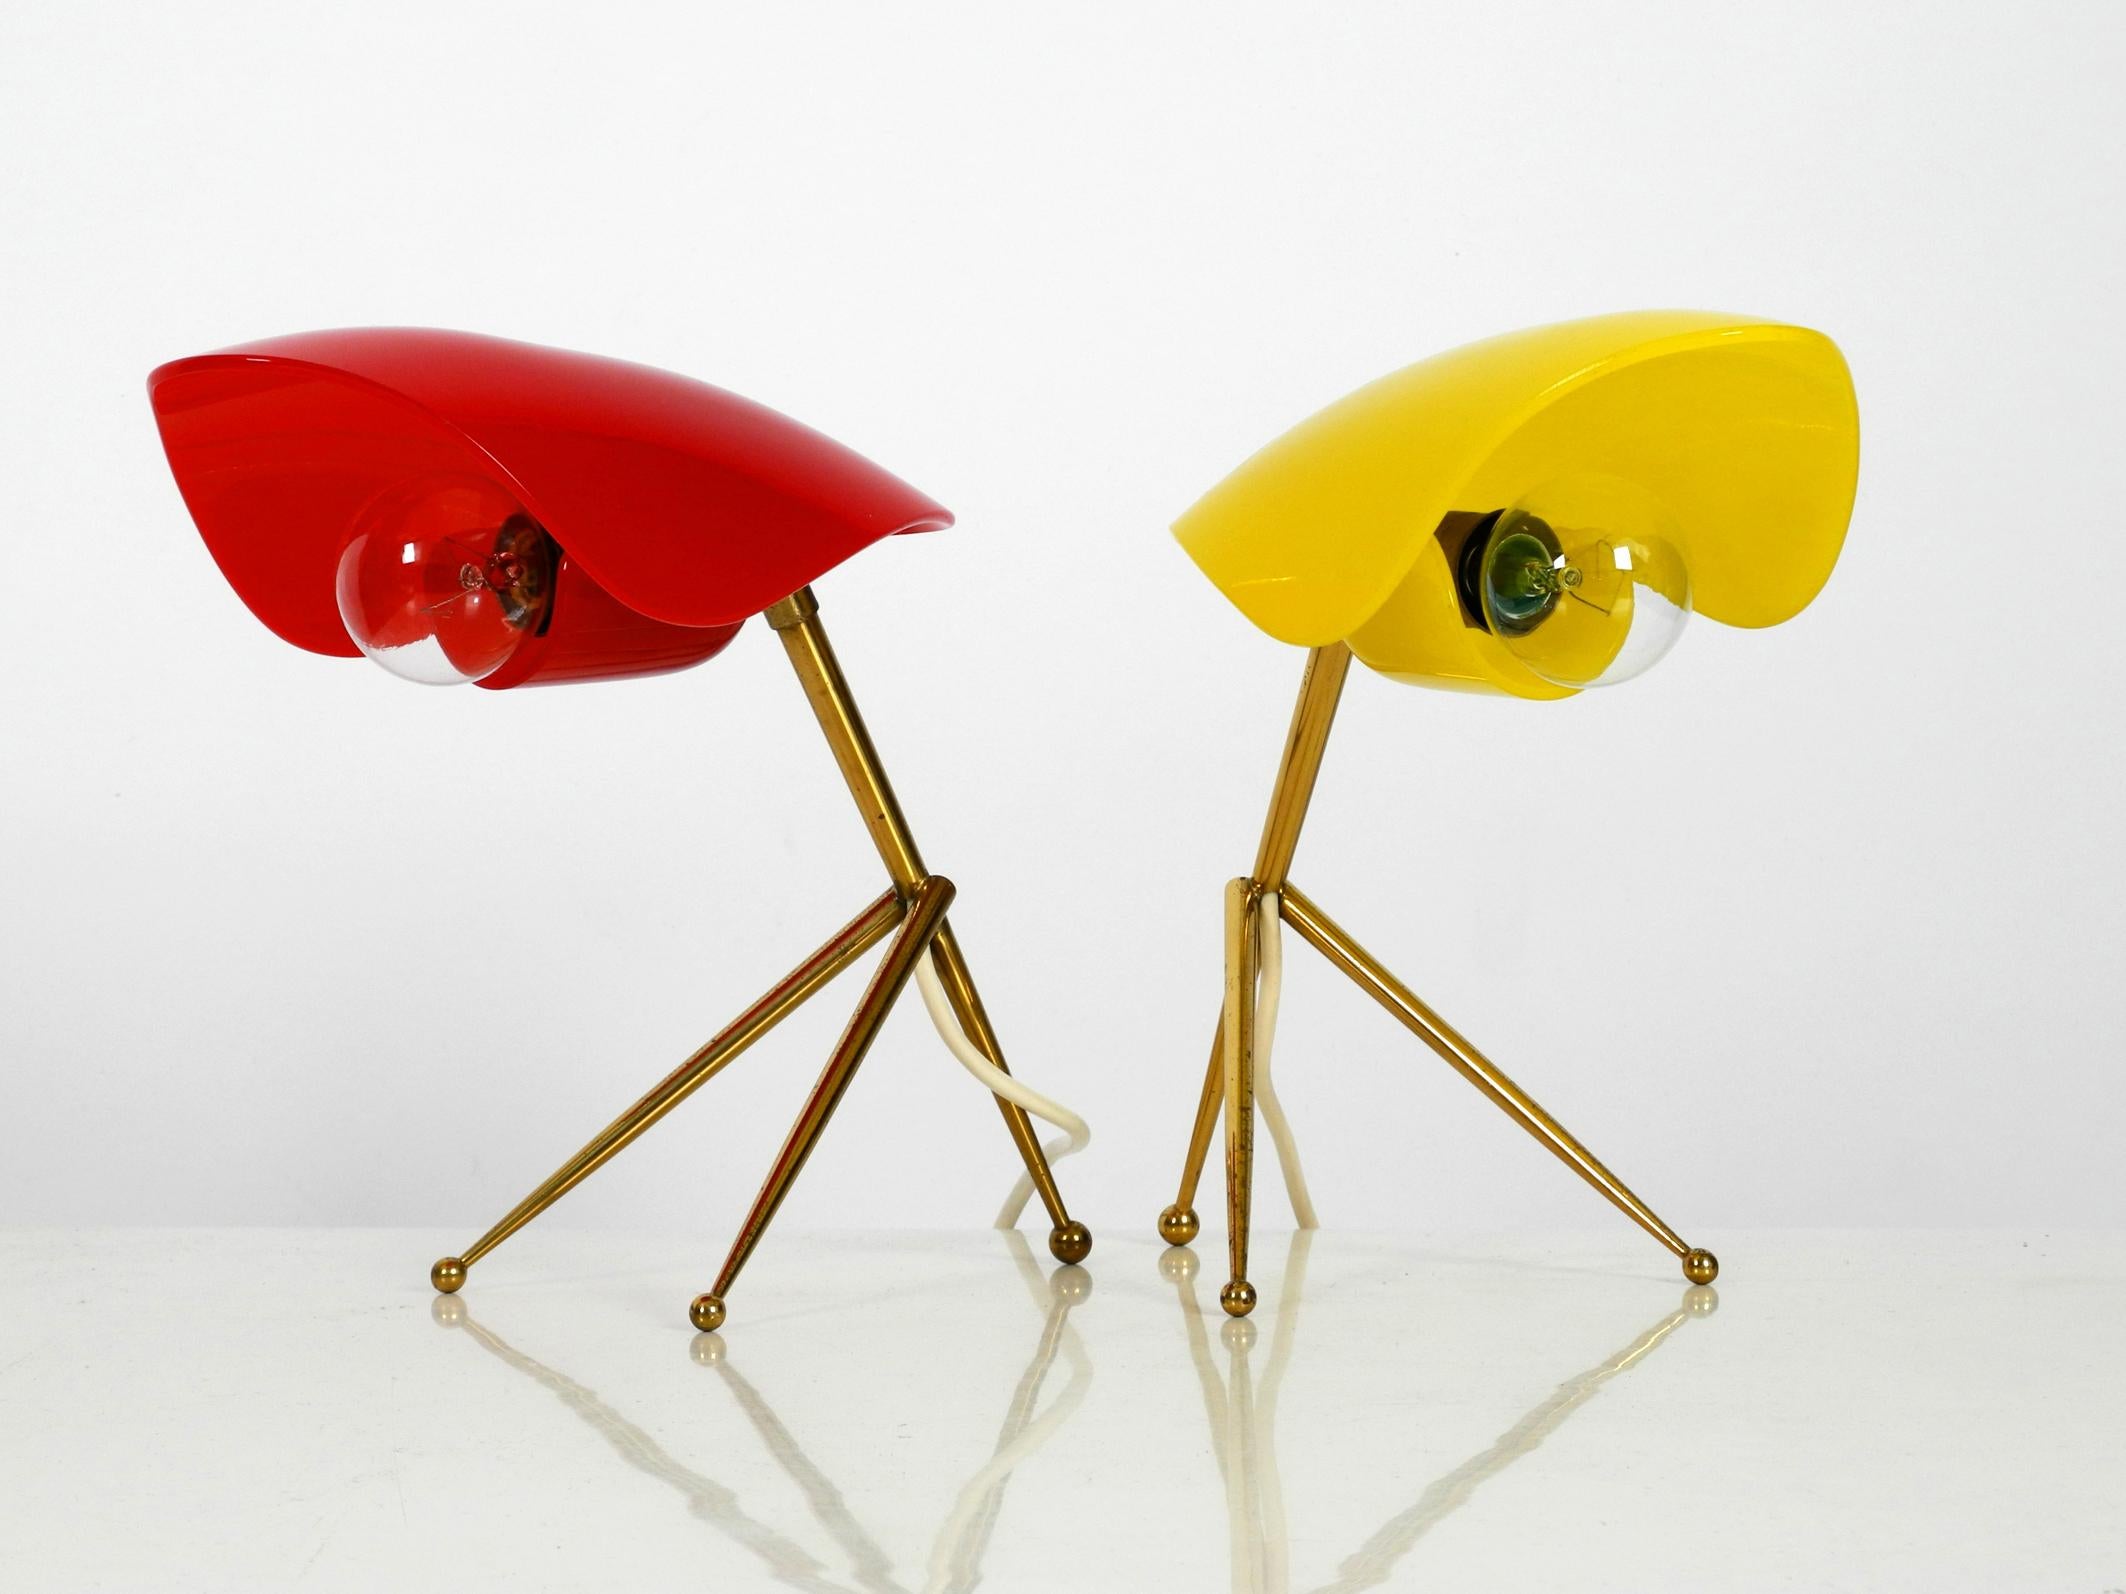 Pair of rare Mid-Century Modern table lamps by WKR Offenbach Germany. 
Lampshades are made of plexiglass one in yellow and one in red and have 
both brass three-legged frames.
Very beautiful 1950s design in very good vintage condition. 
100%